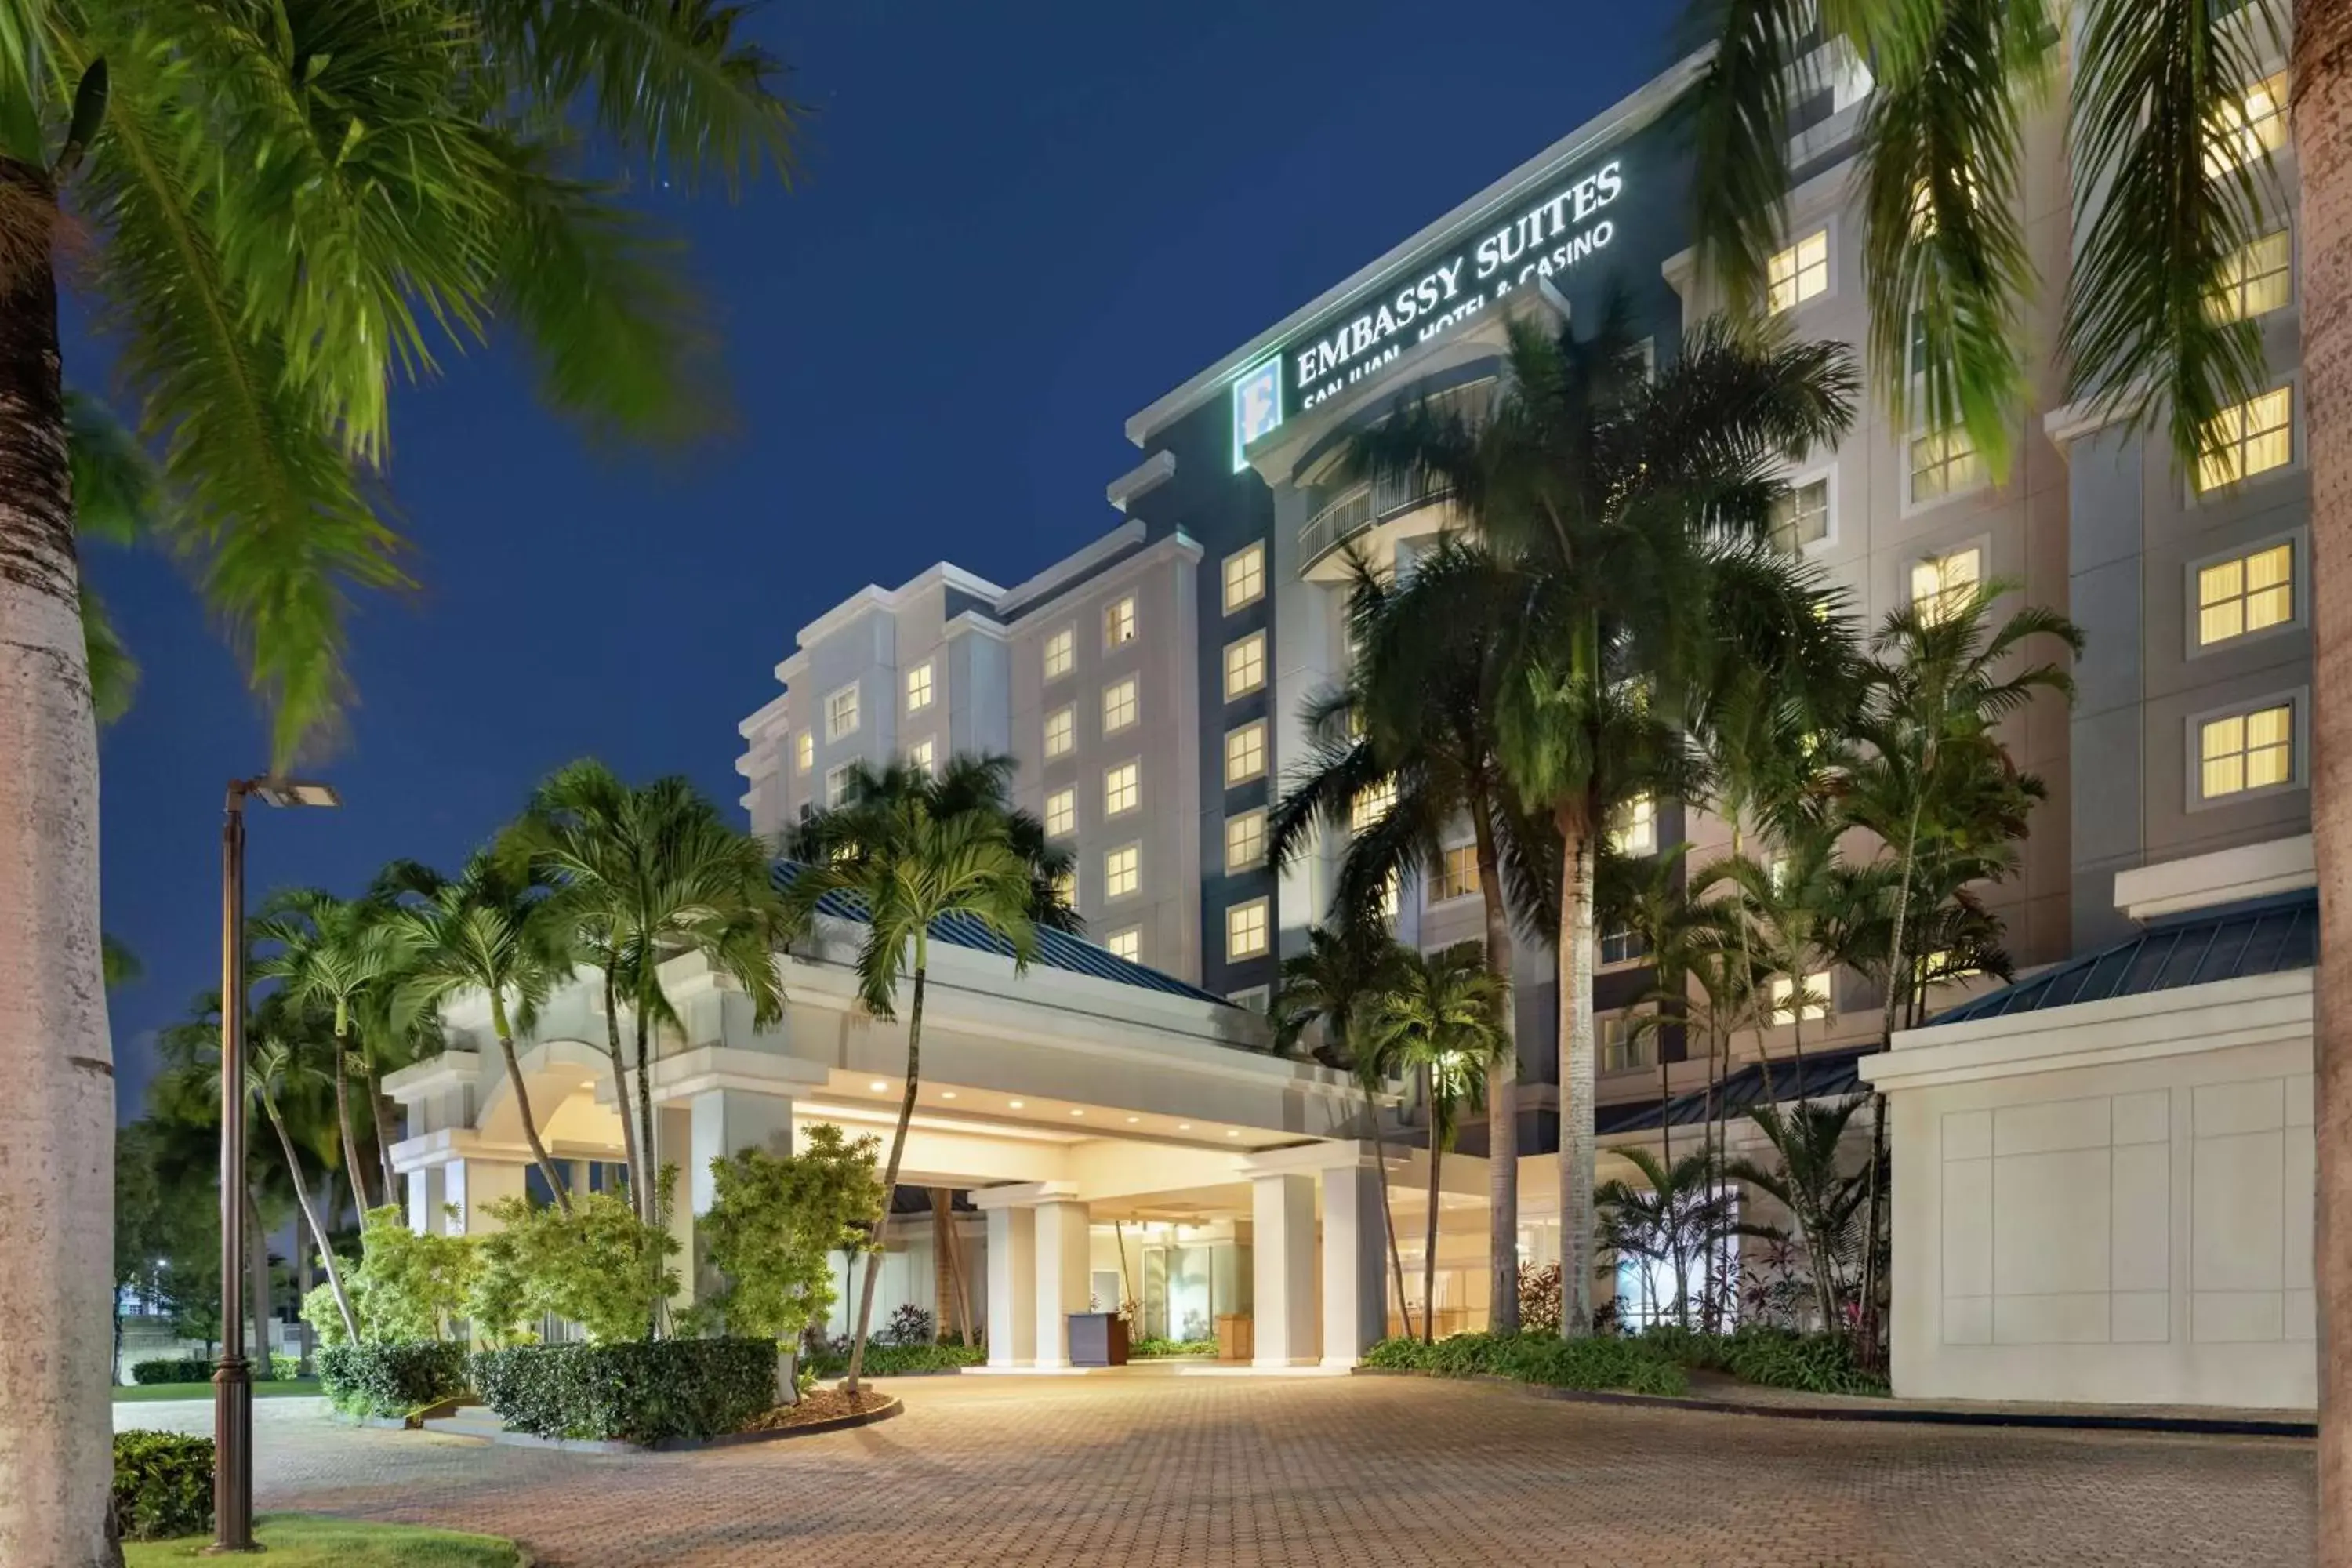 Property Building in Embassy Suites by Hilton San Juan - Hotel & Casino